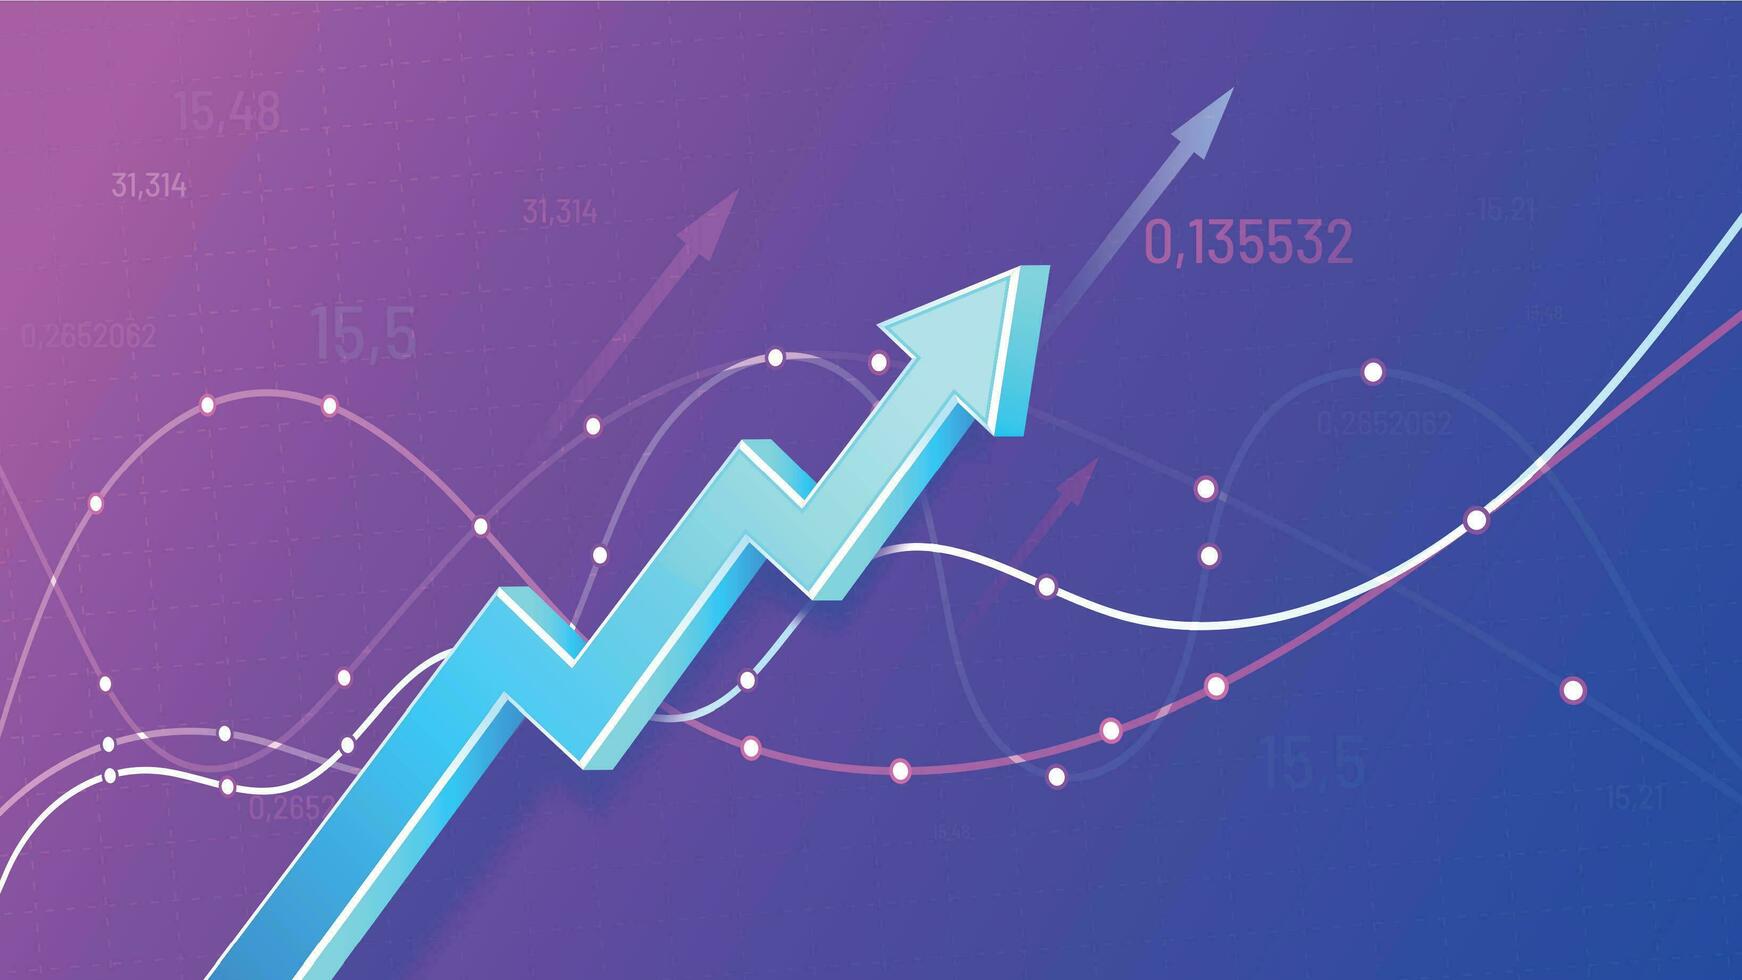 Growing financial schedule 3D arrow. Profit growth, rising chart and finance business statistic vector illustration. Successful business development, income increase. Positive stock market trend